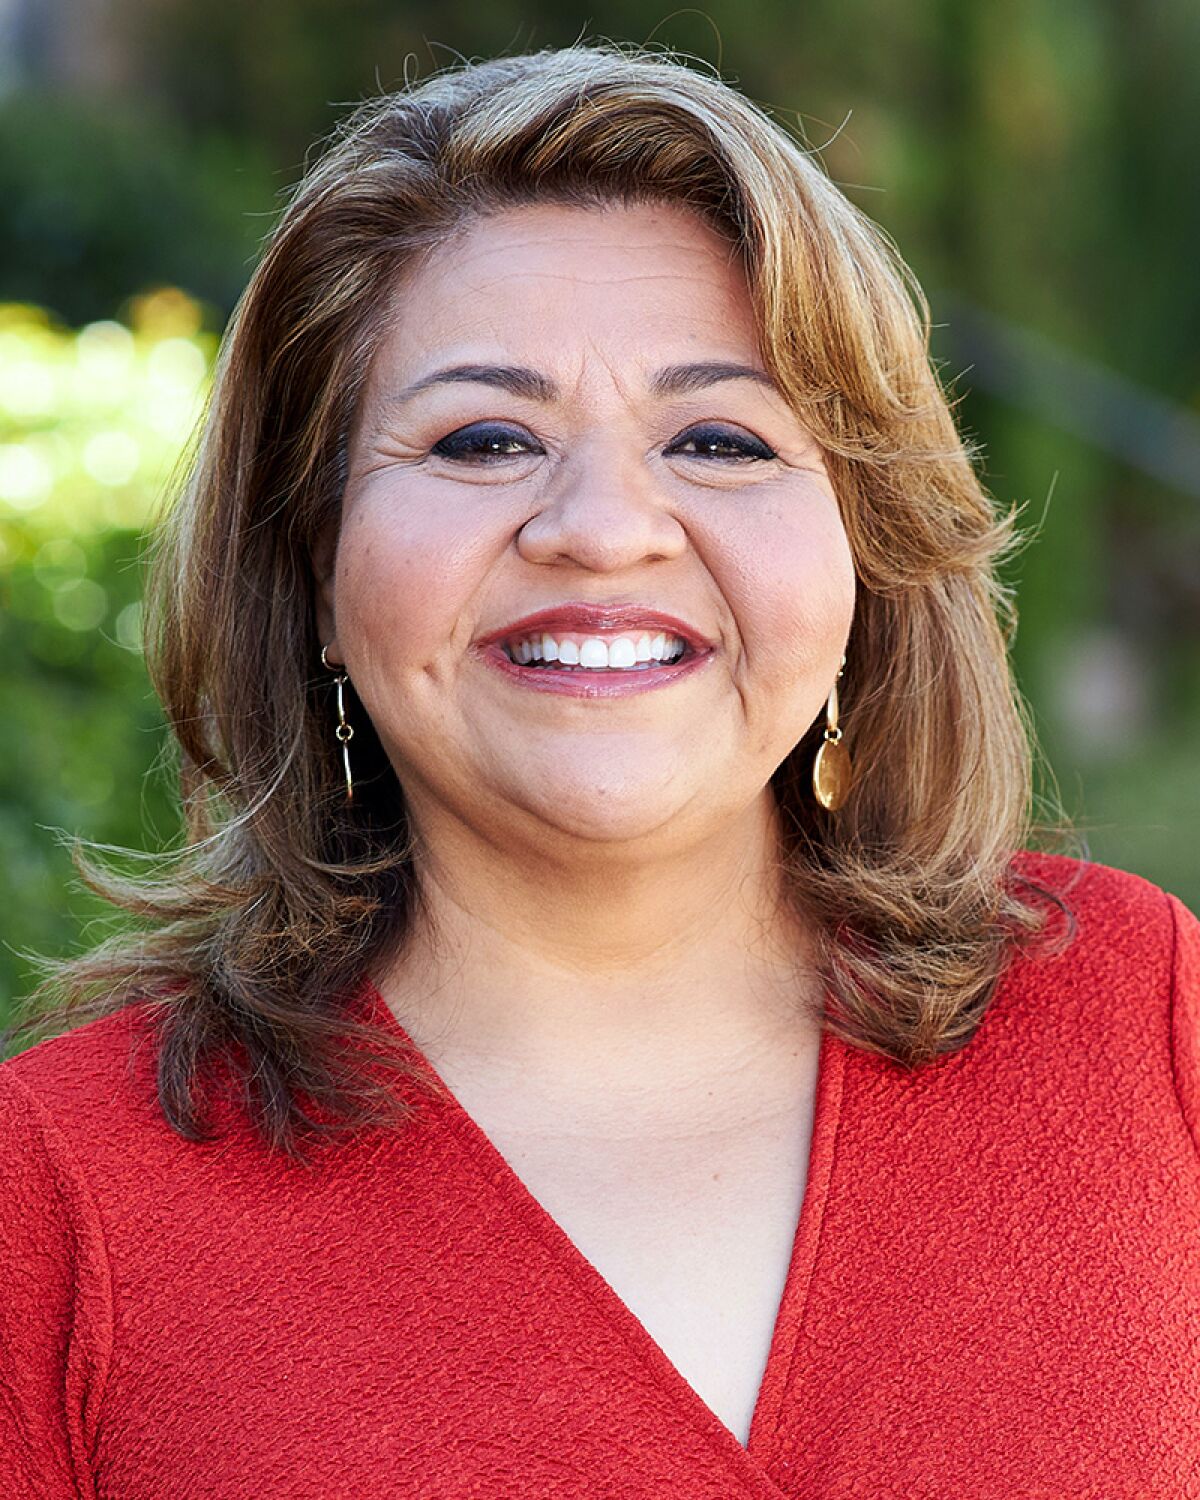 79th Assembly District candidate Leticia Munguia is a community organizer.